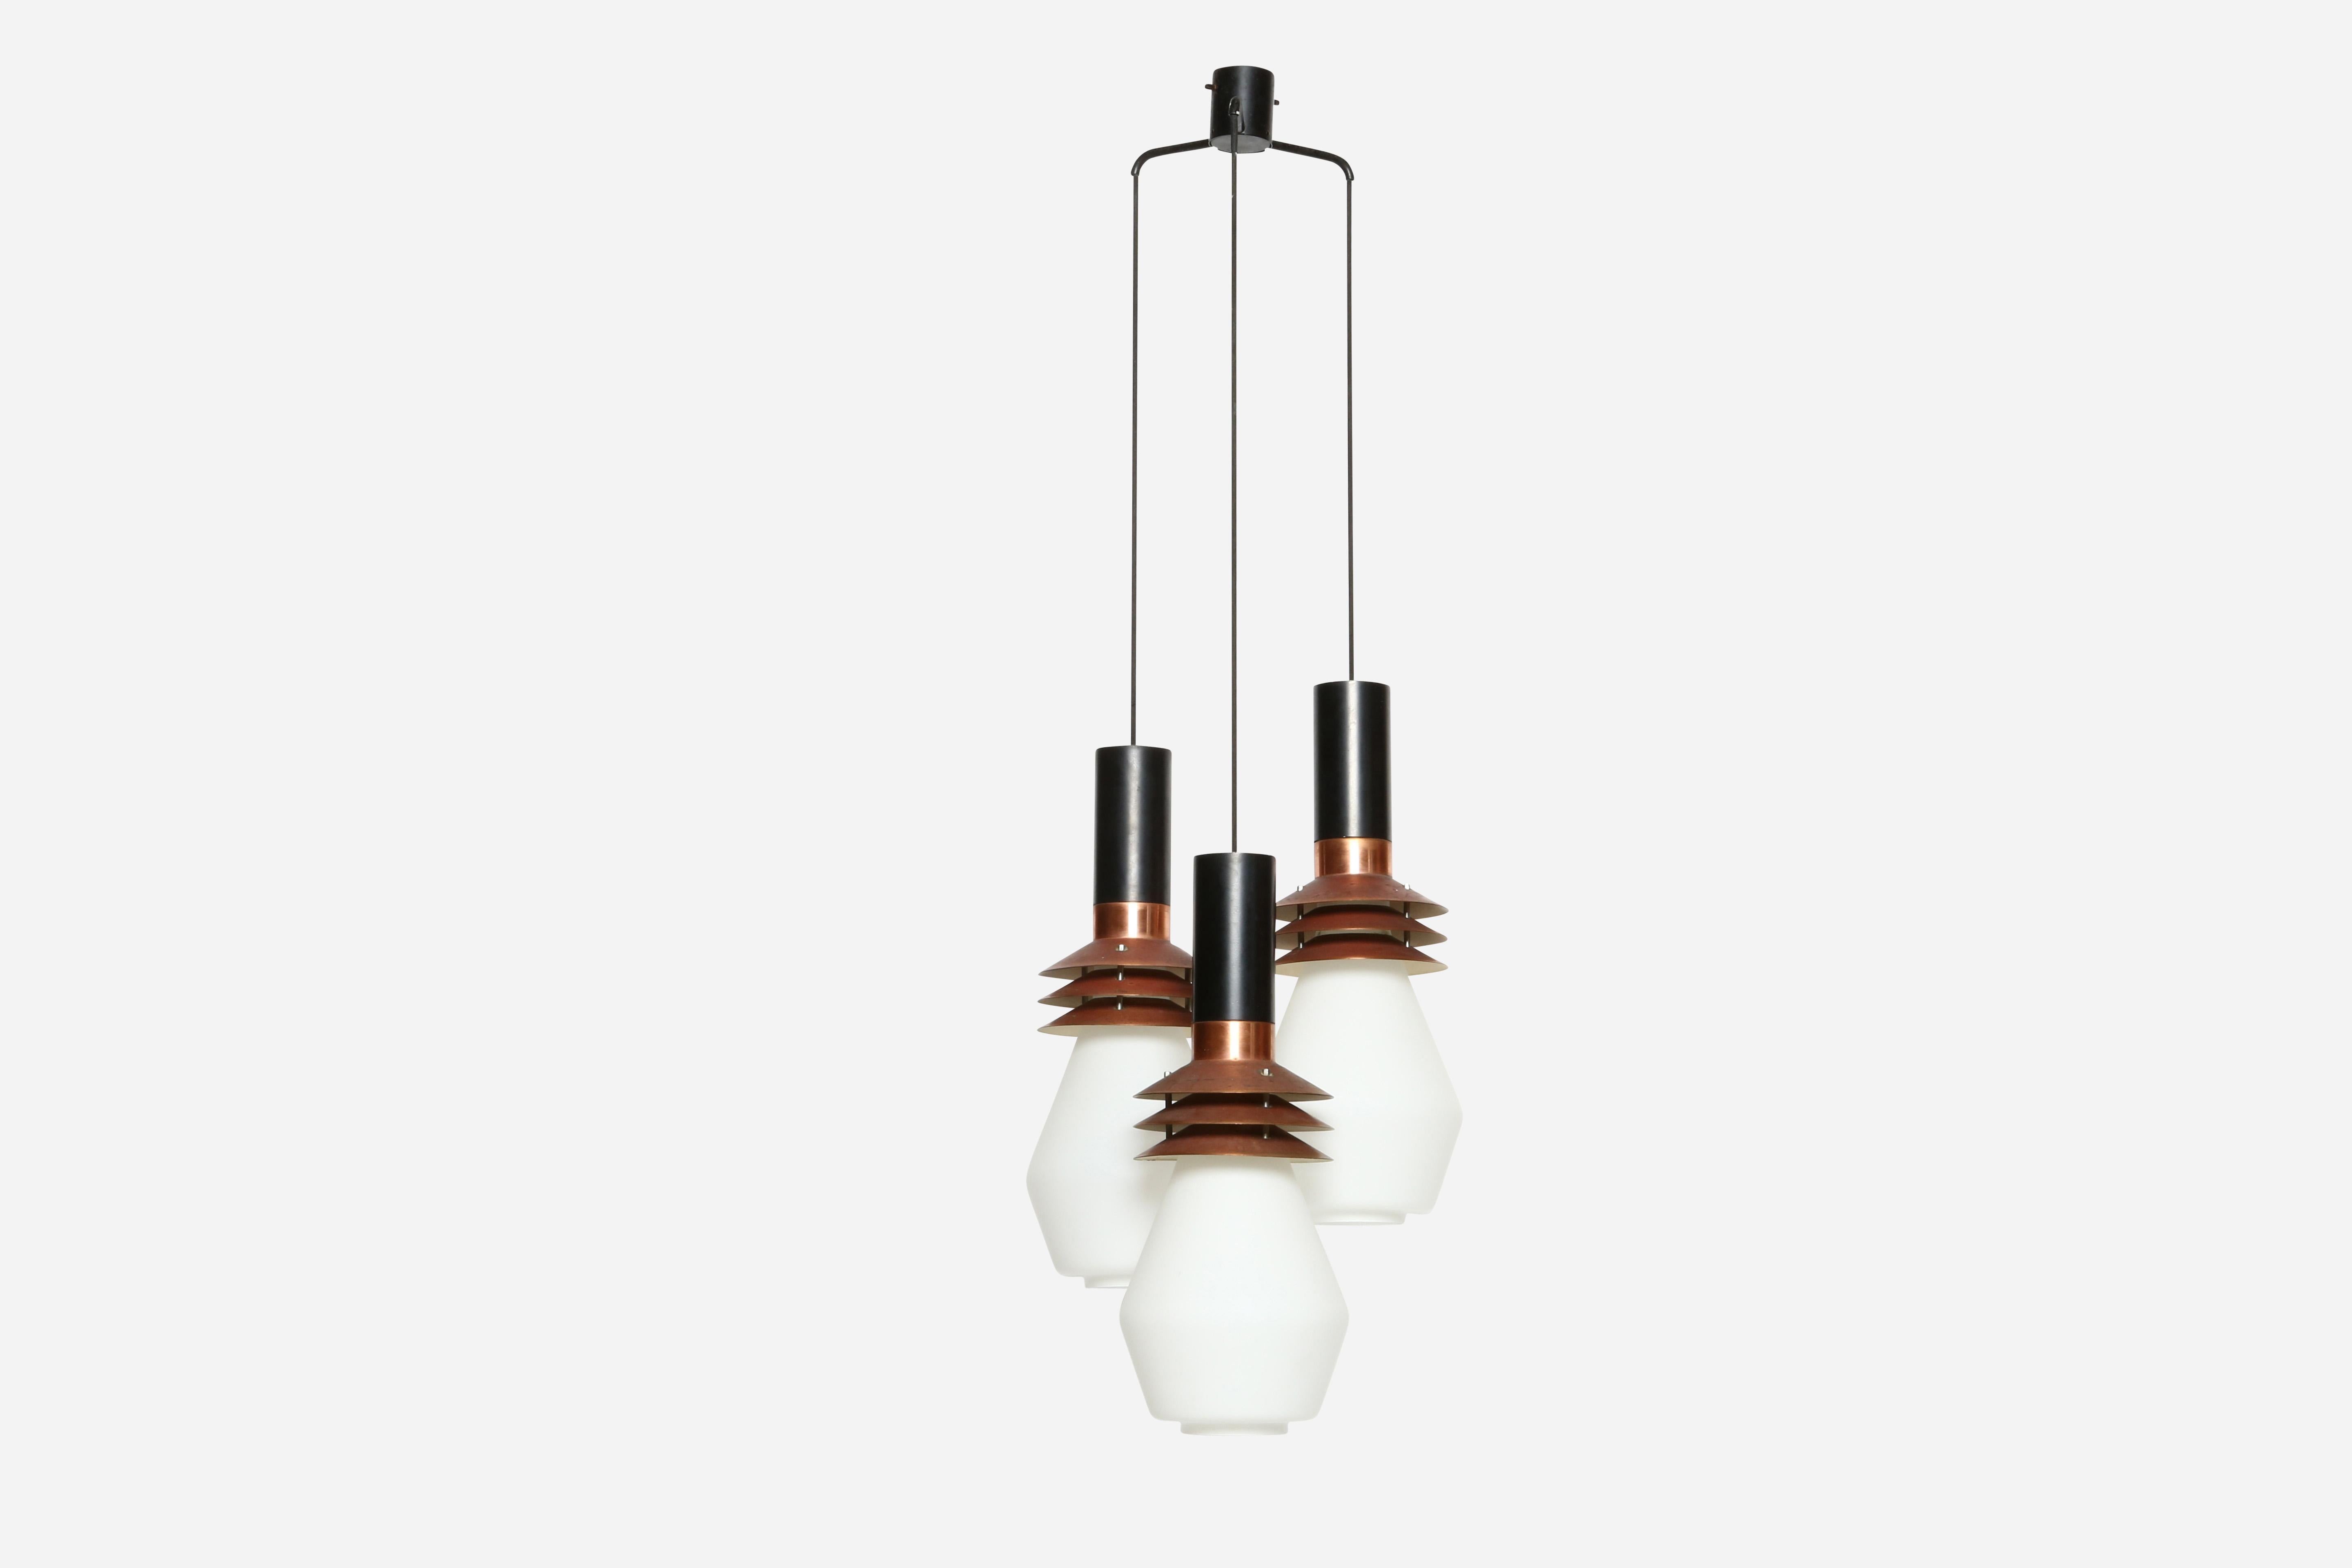 Stilnovo chandelier model 1253
Copper, enameled metal, matte opaline glass.
Three very large glass bells suspended on black cords.
Rare fixture with Stilnovo label.
Body of the pendants is 20.5 inches in height and 8 inches in diameter,
Designed and